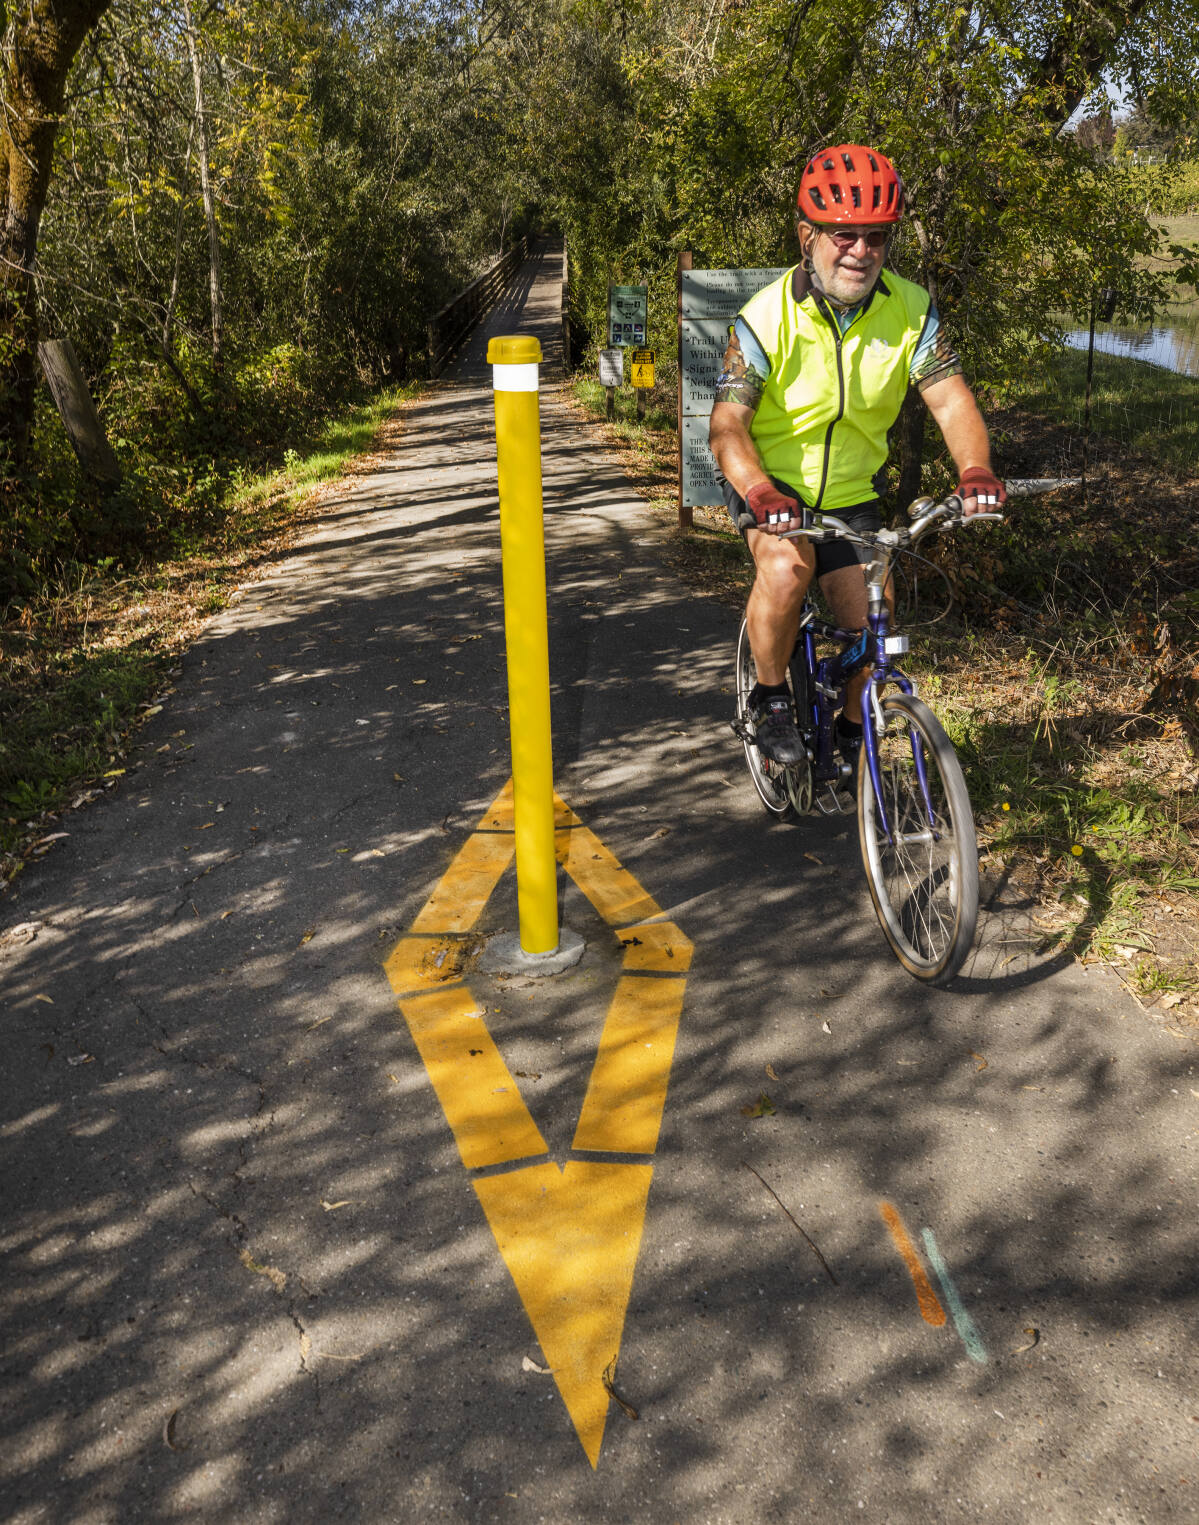 Saanich asks CRD to pull bollards that cause cyclists 'horrific